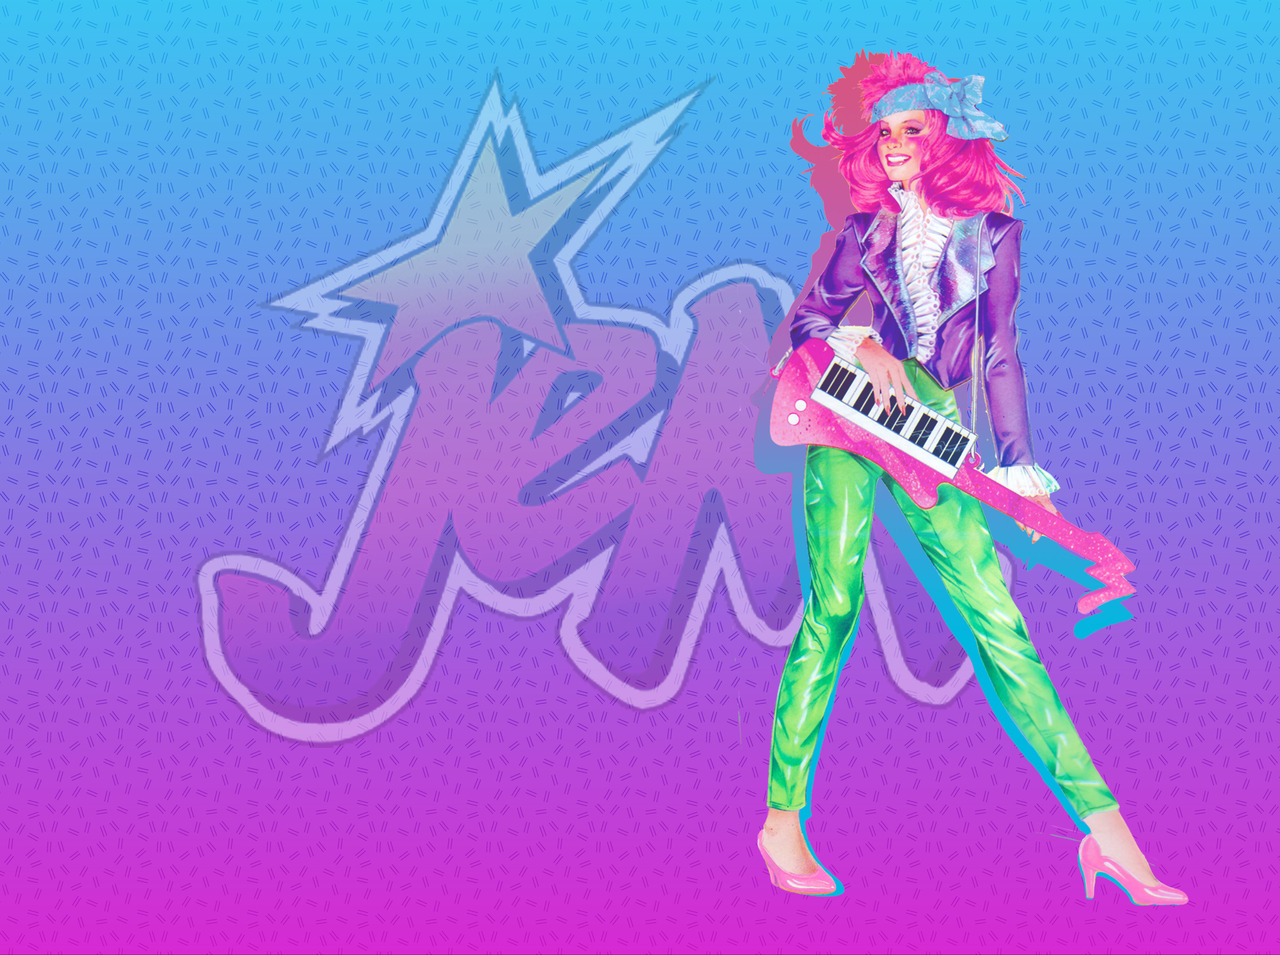 Jem dvds I made for a friend Thought to share them with other Jem